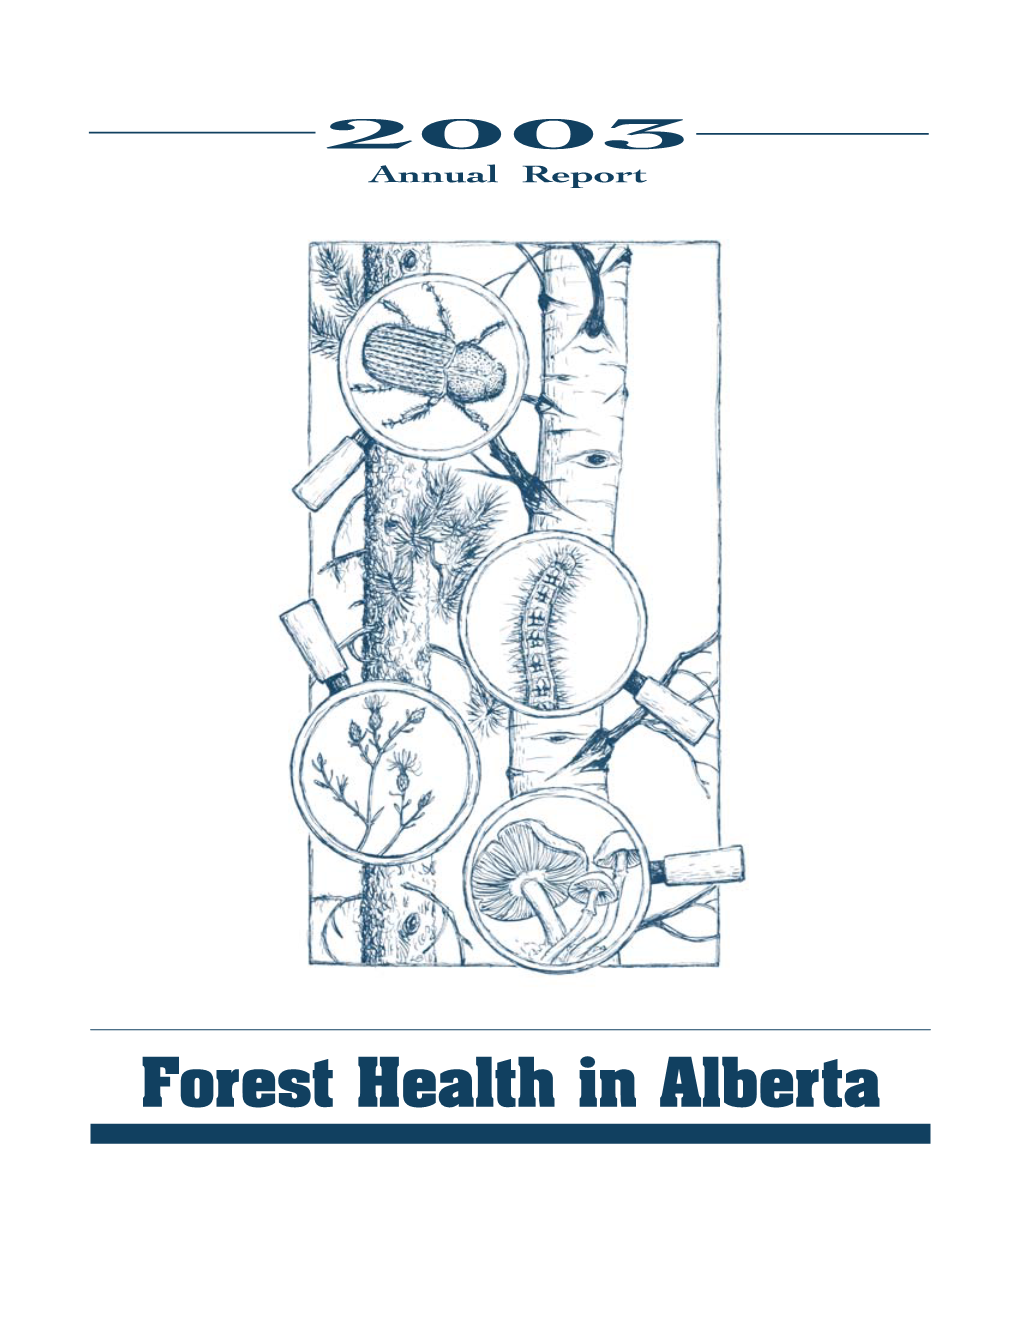 Forest Health Annual Report 2003